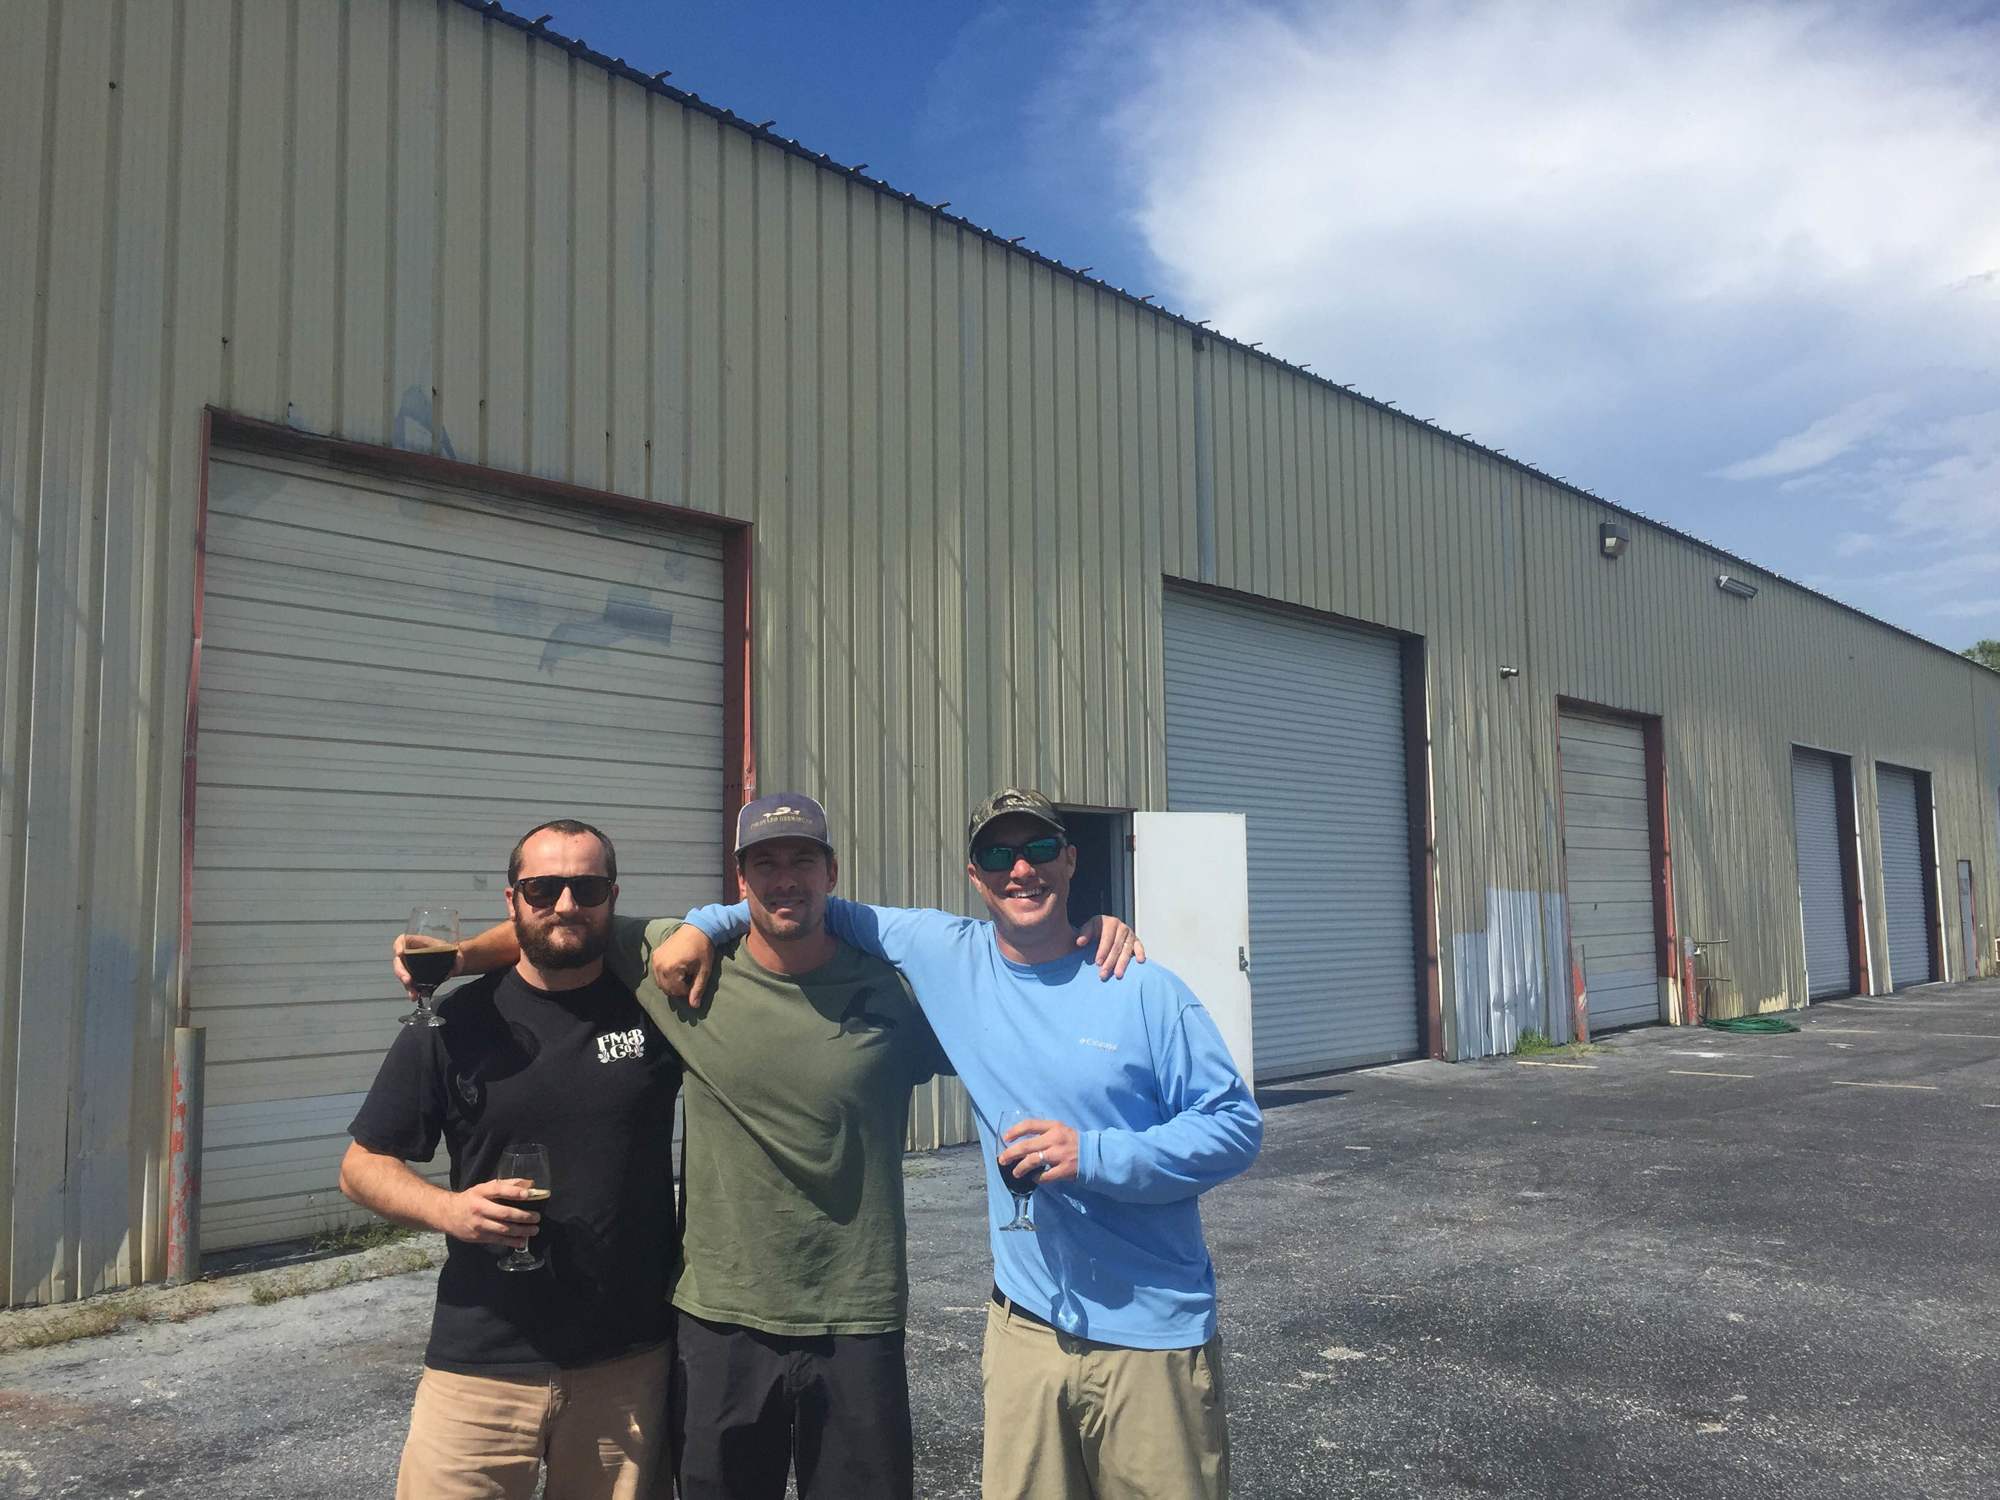 Calusa Brewing Co. brewmaster Jason Thompson and founding partners Geordie Rauch and Vic Falck hope to open their brewery by late fall.